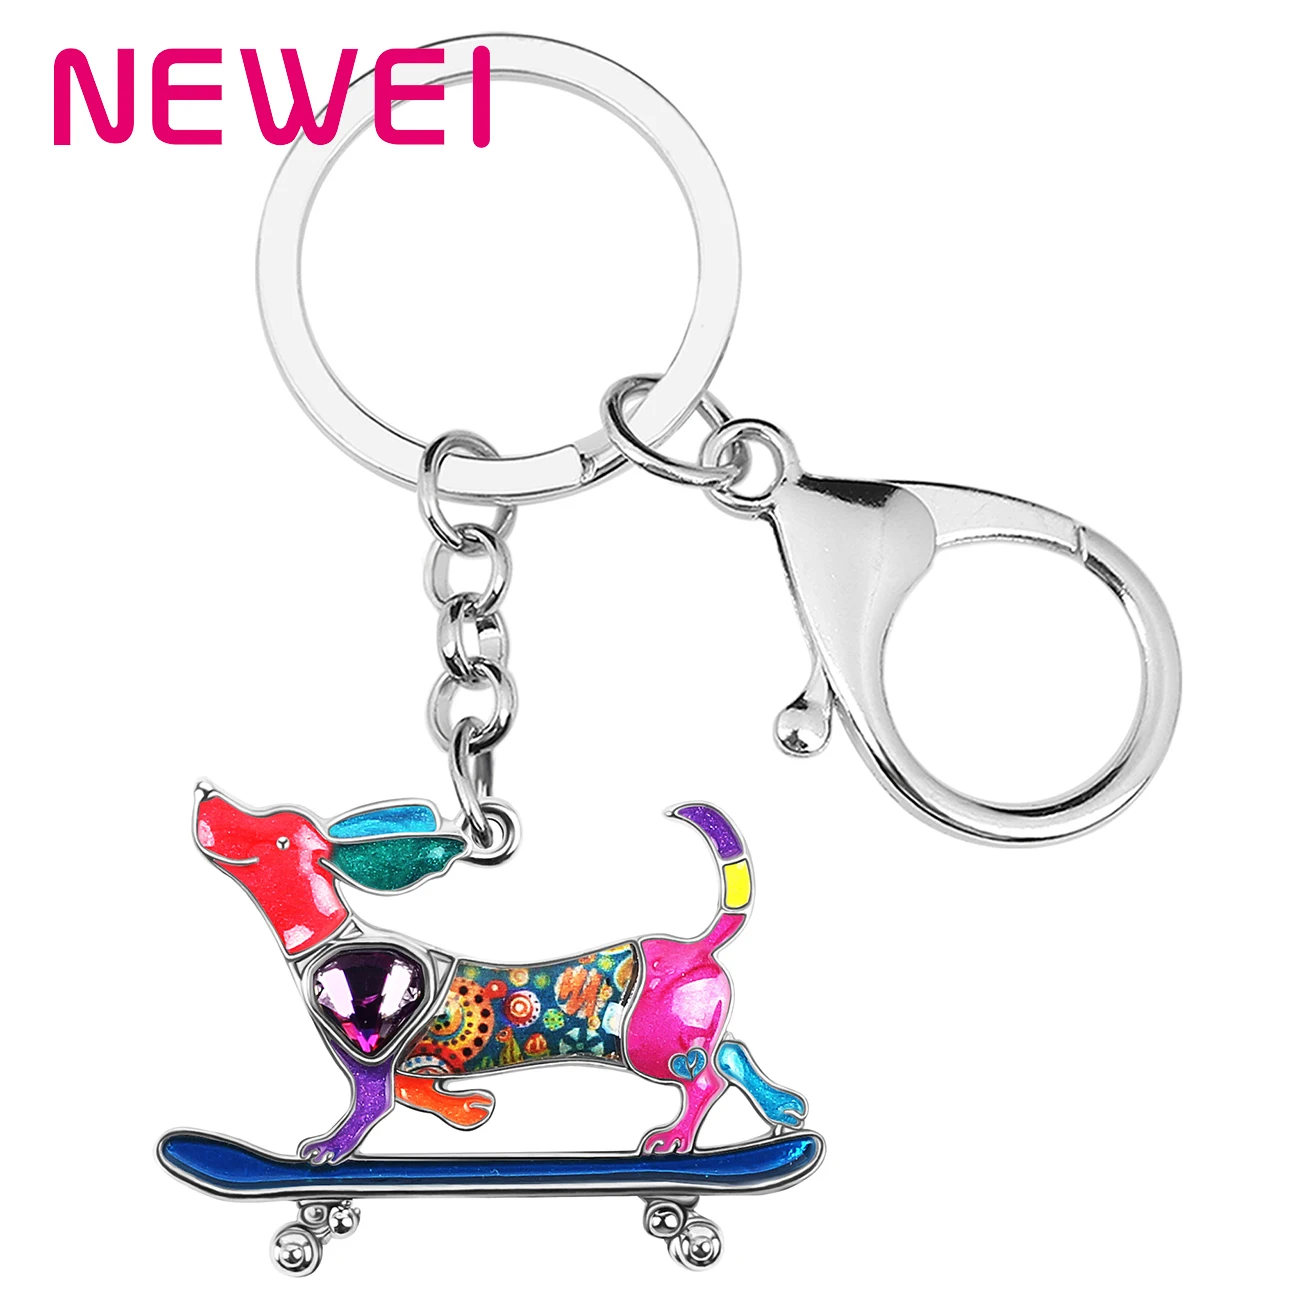 

Enamel Alloy Crystal Skateboard Dachshund Dogs Keychains Car Key Chain Ring Gifts Fashion Jewelry for Women Girls Pets Lovers, Multicolor,blue,black,purple,red,brown